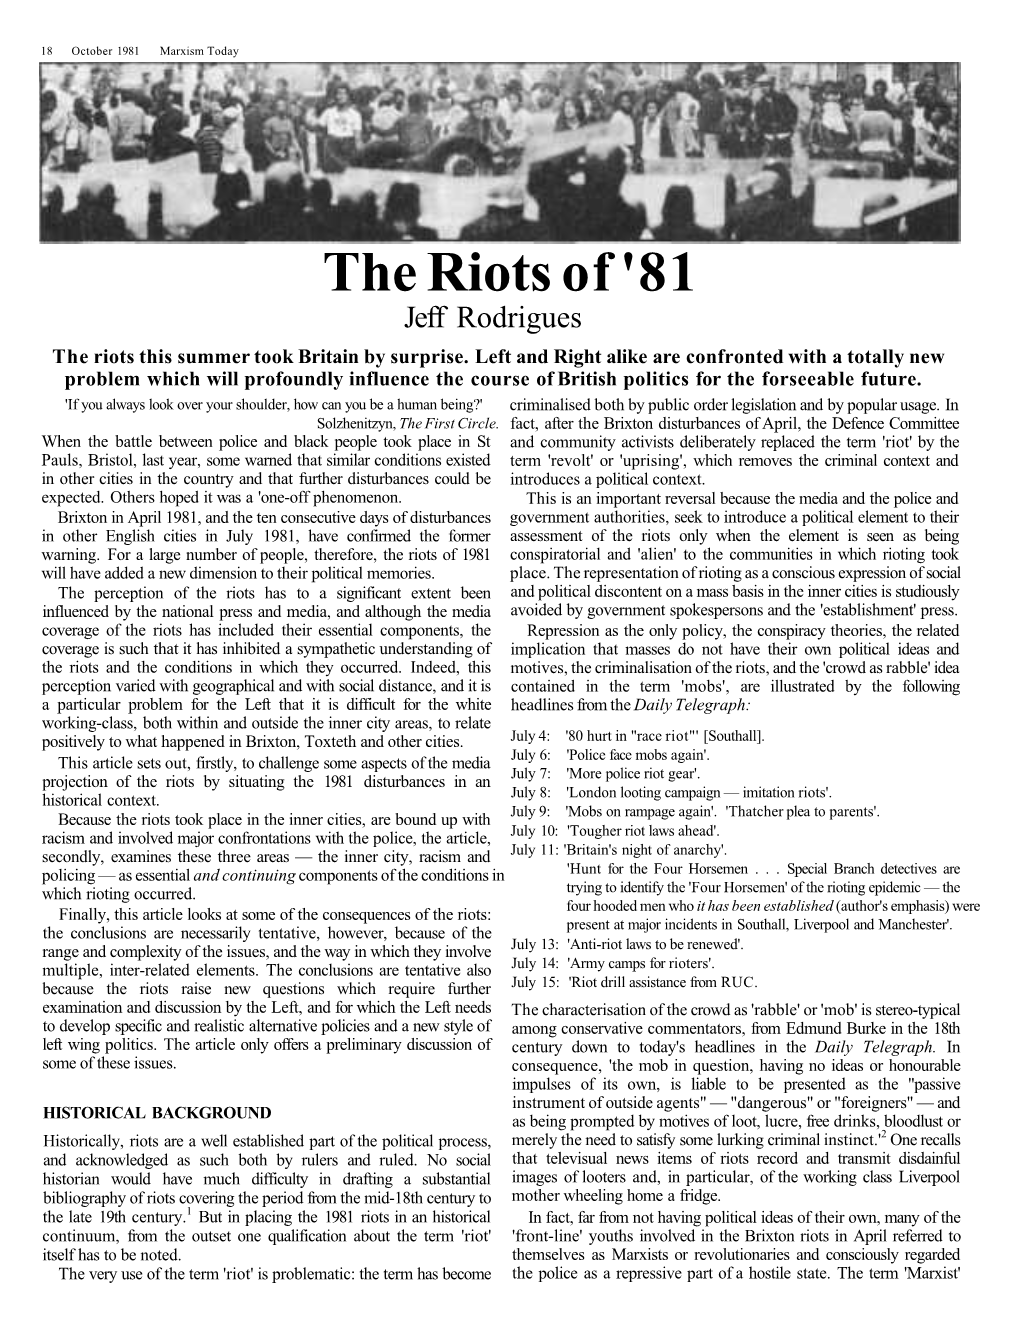 The Riots of '81 Jeff Rodrigues the Riots This Summer Took Britain by Surprise